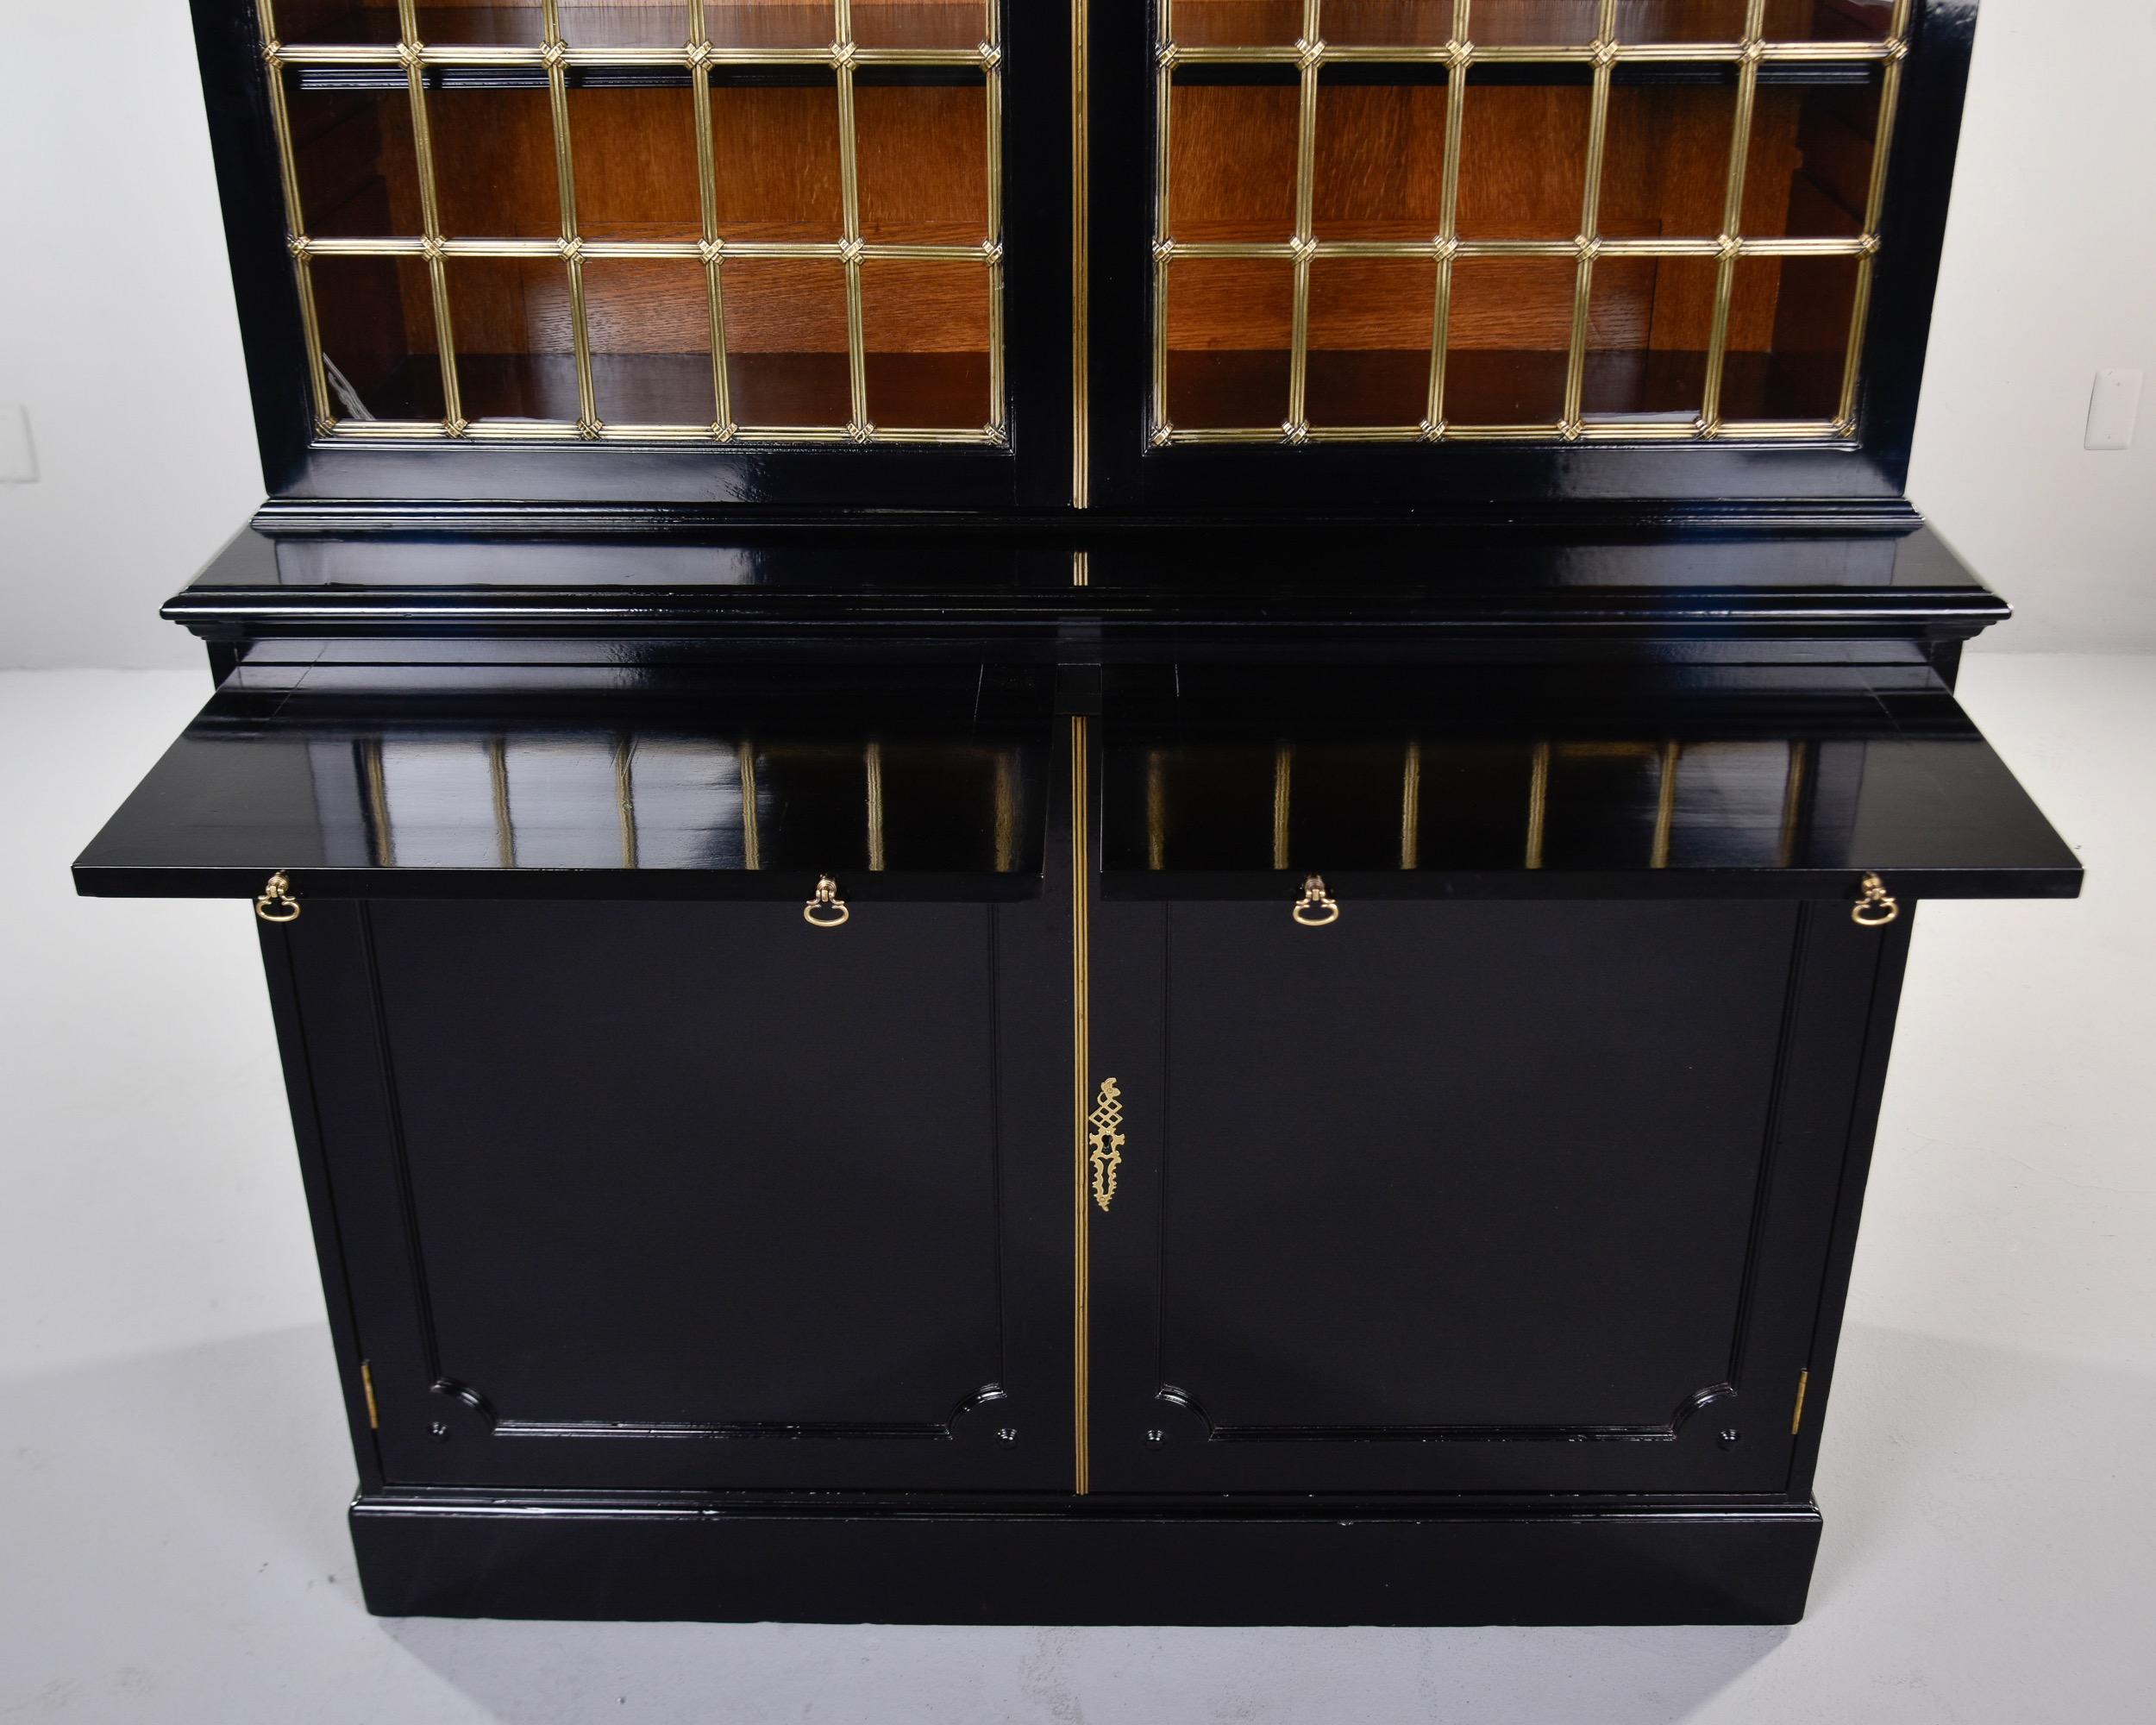 Early 20th C English Ebonised Mahogany Bookcase with Brass Grill & Leaded Glass For Sale 3